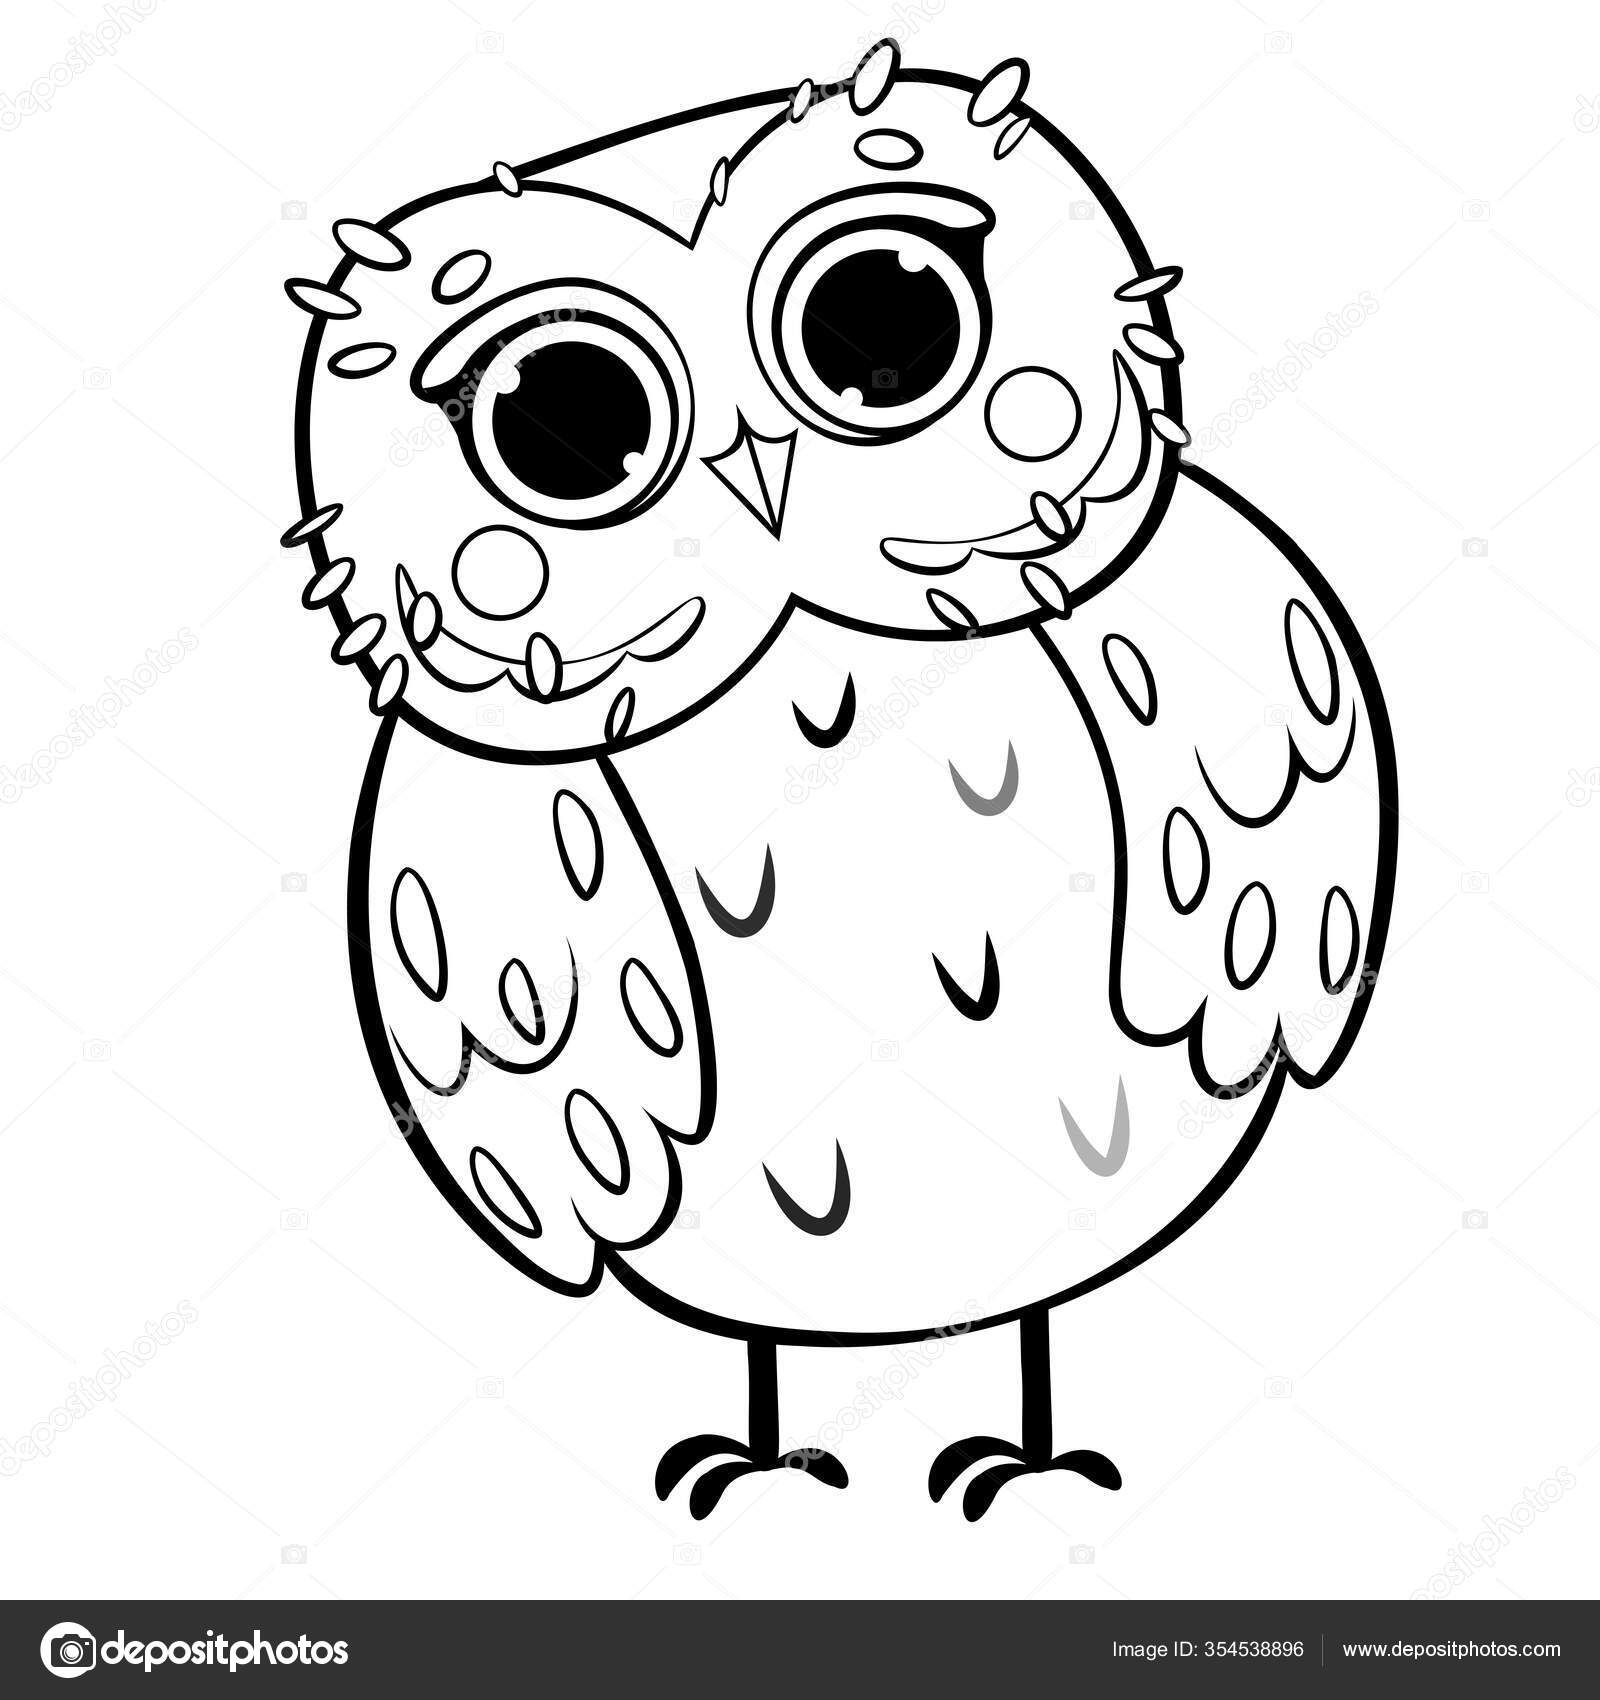 Coloring Page Outline Cute Cartoon Owl Vector Image Isolated White ...